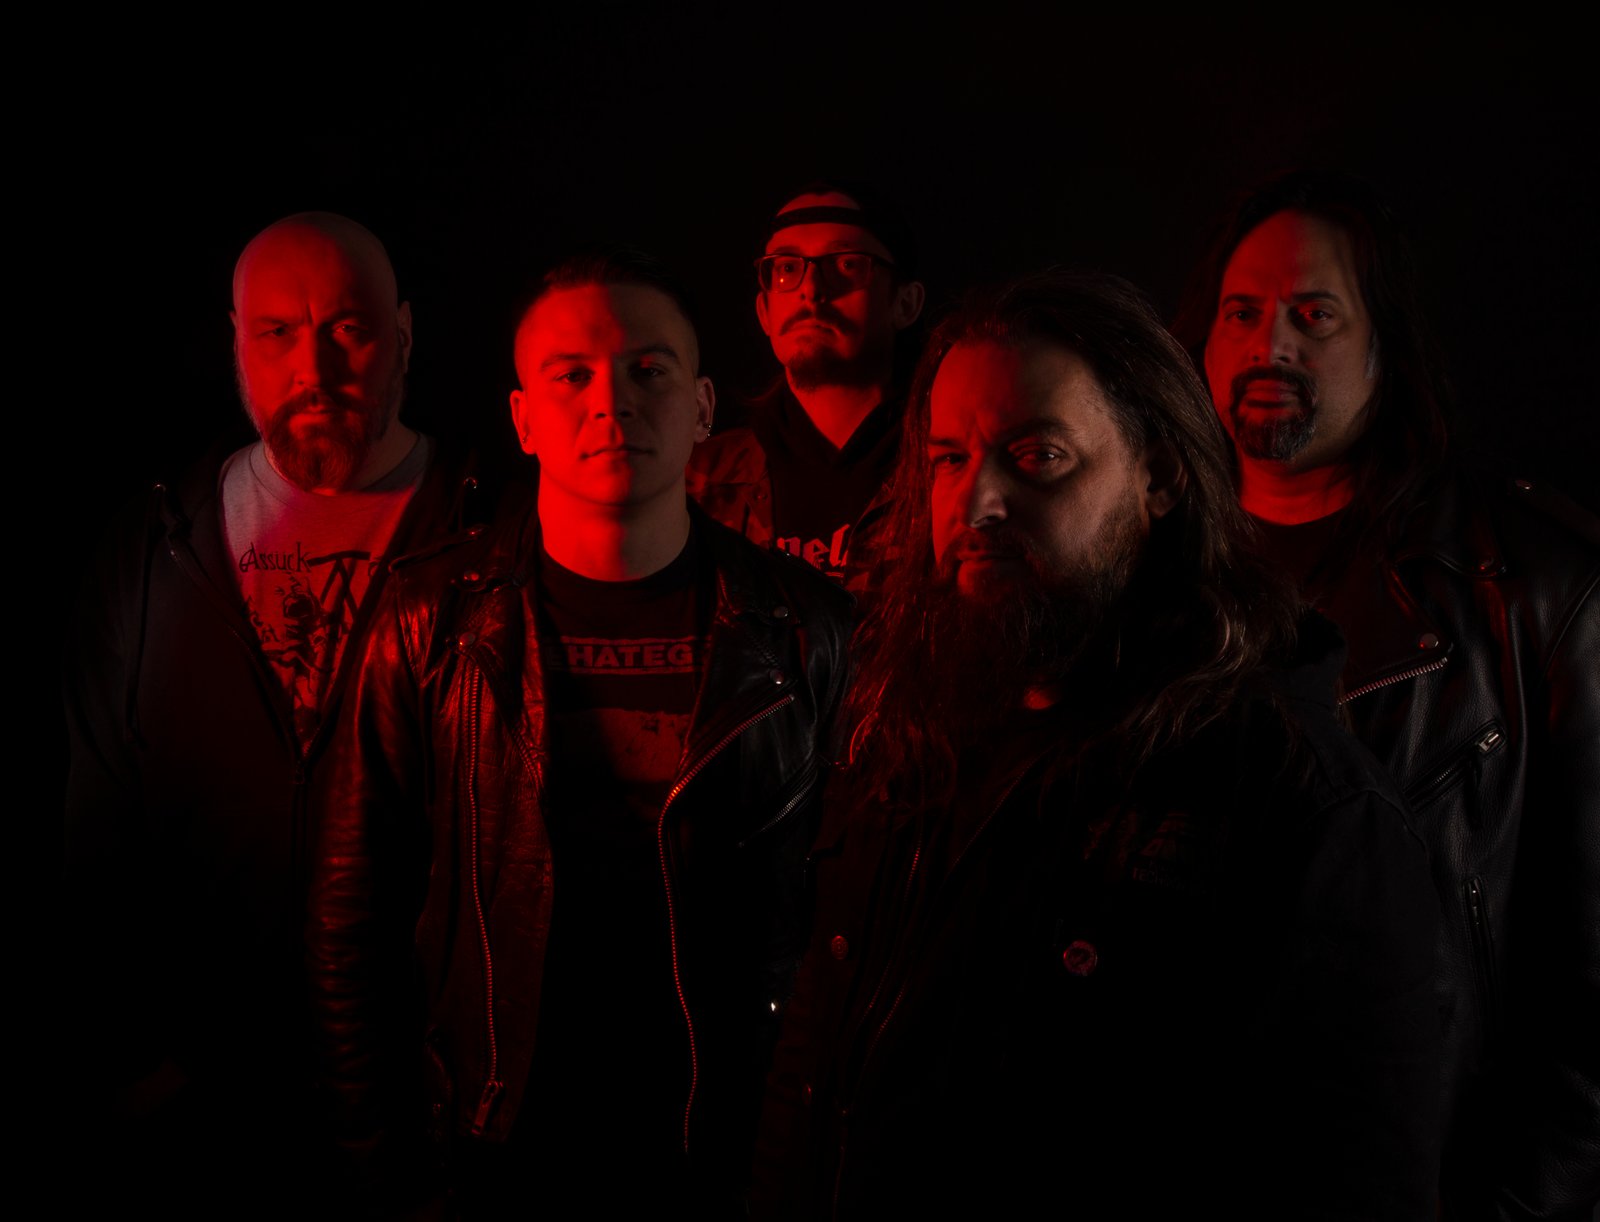 Ringworm – “Death Becomes My Voice”